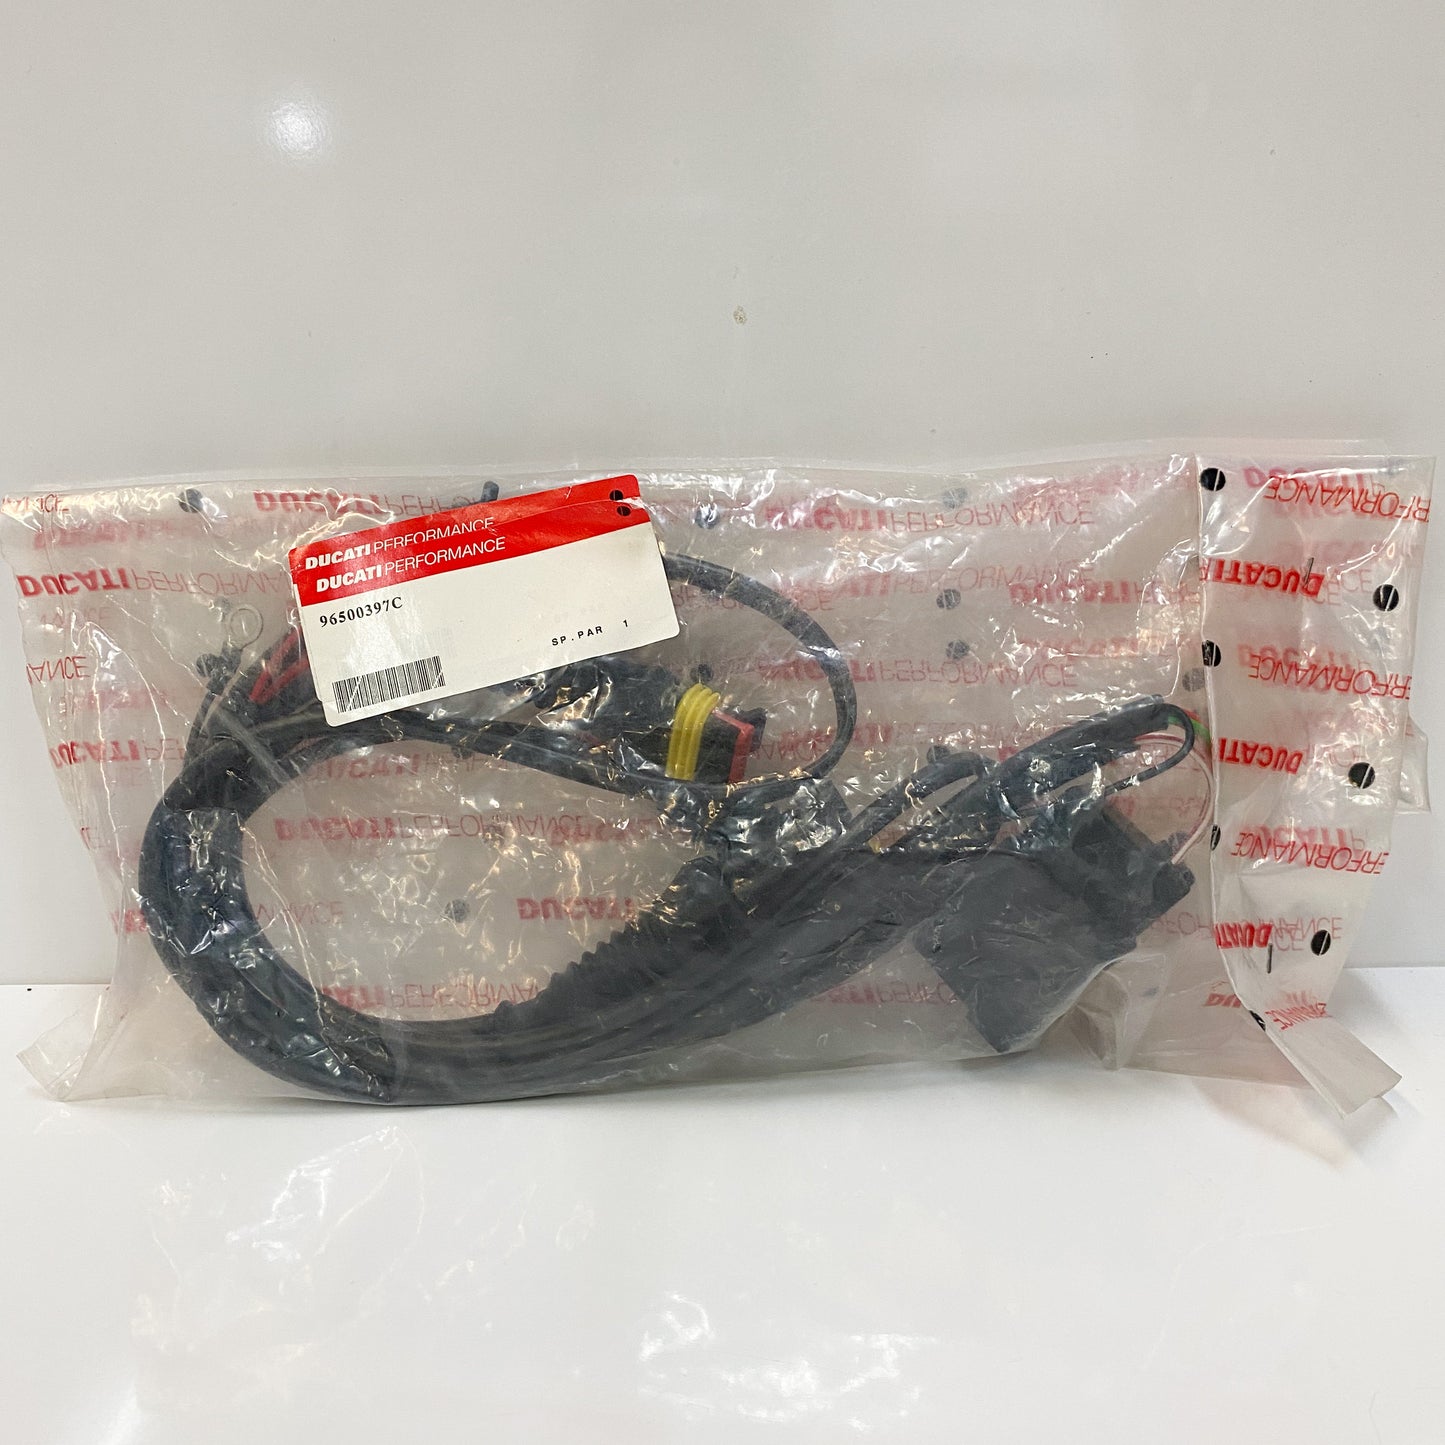 Ducati OEM Stand Safety Wiring 1 Wire to 97 96500397C